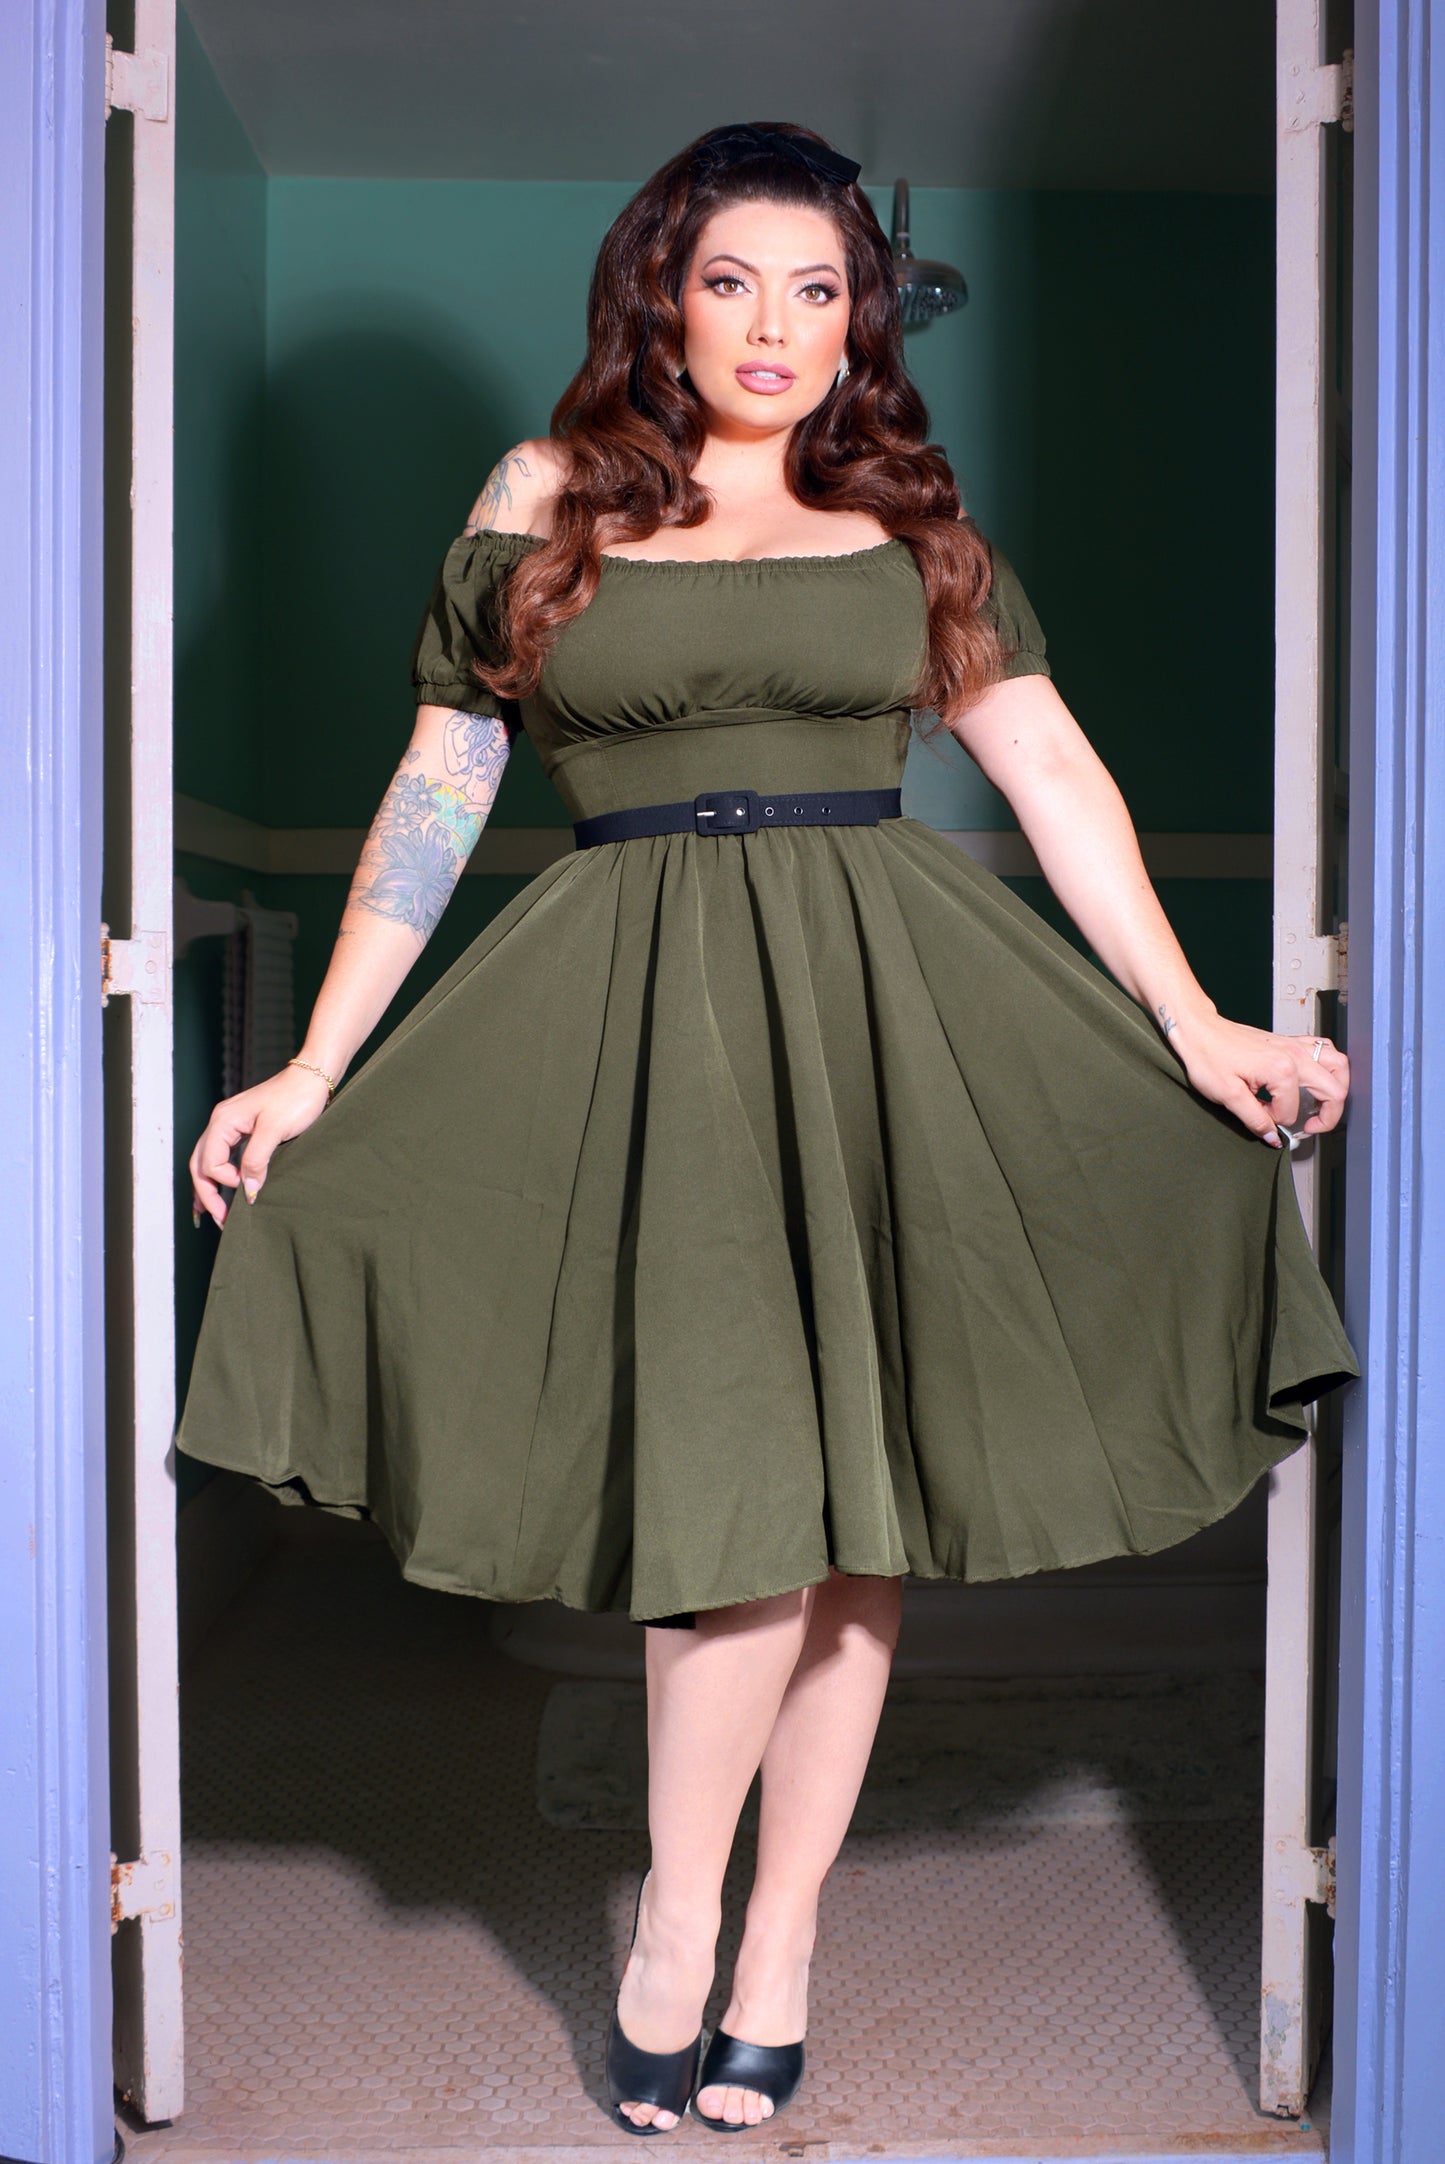 Marie-Thérèse Peasant Dress with Short Sleeves in Olive Poly Crepe | Pinup Couture